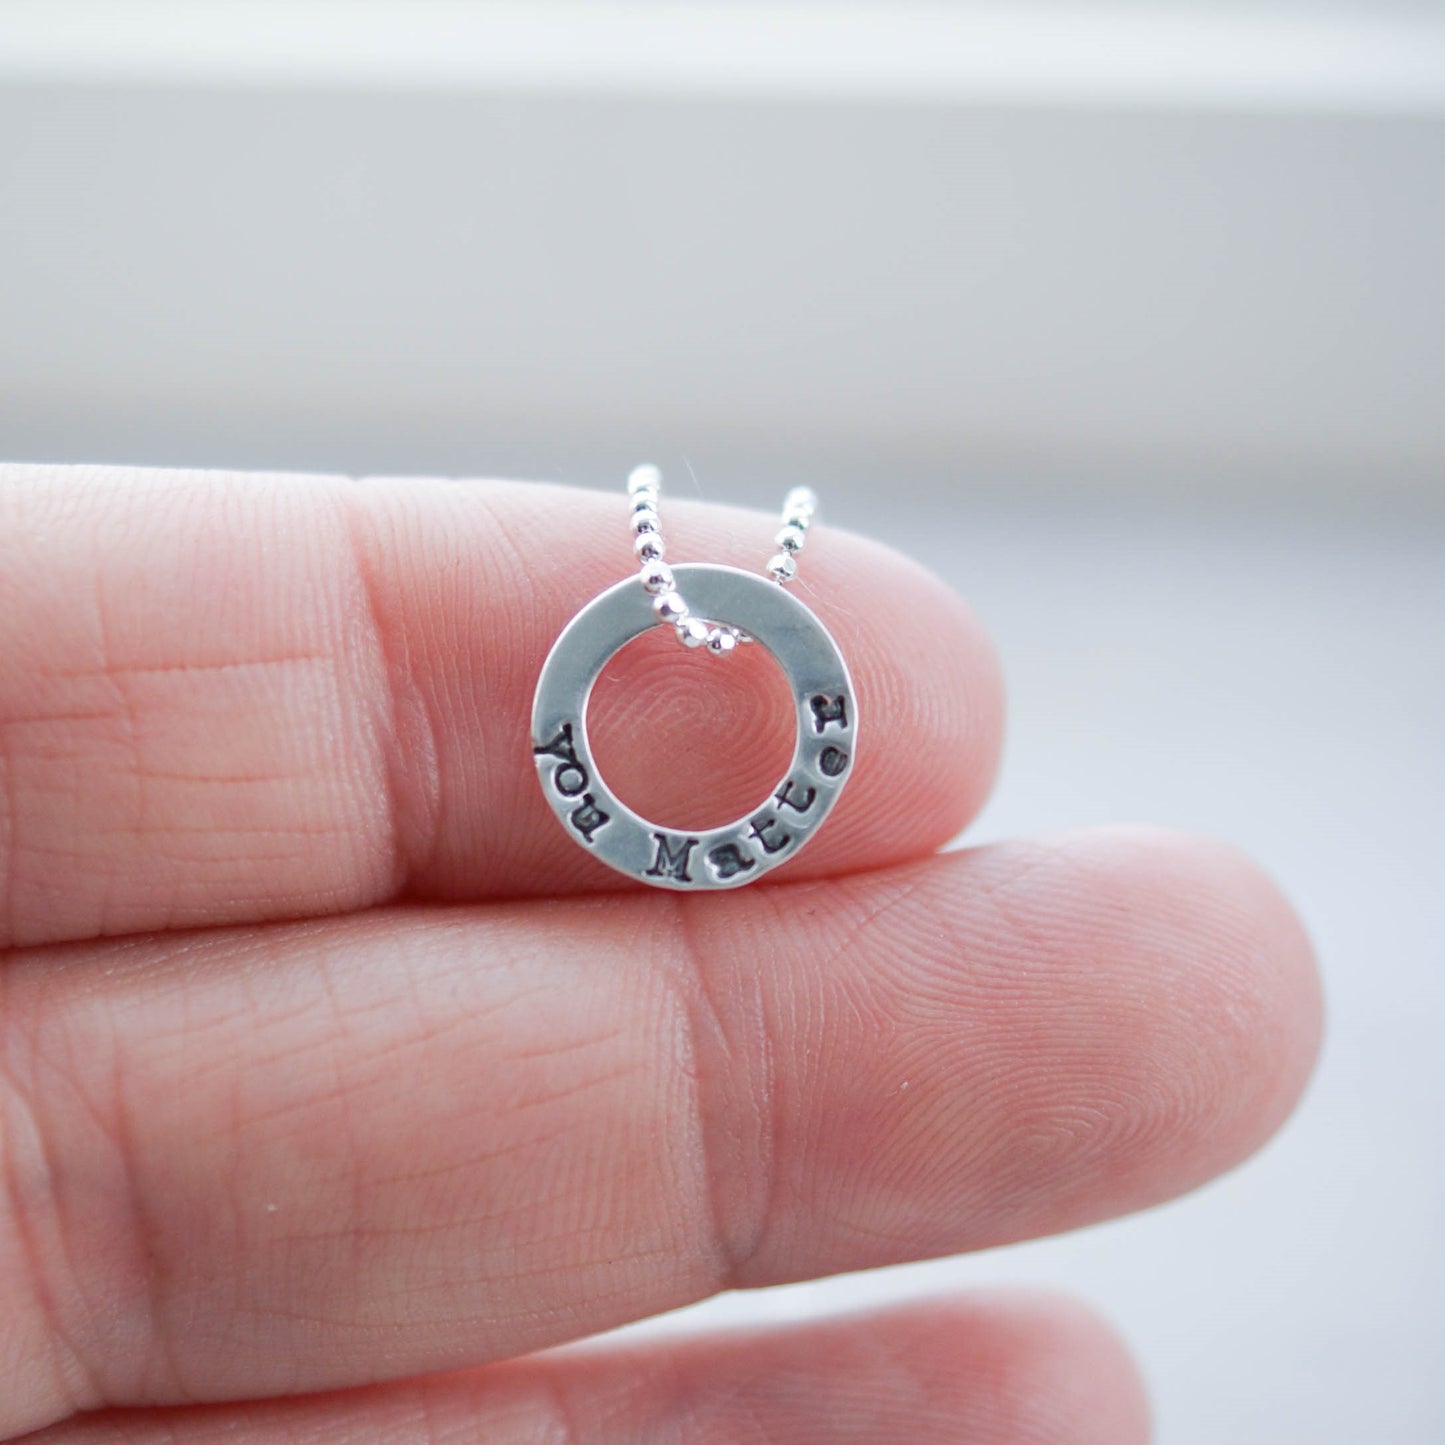 Tiny circle necklace in sterling silver stamped with You Matter on hand